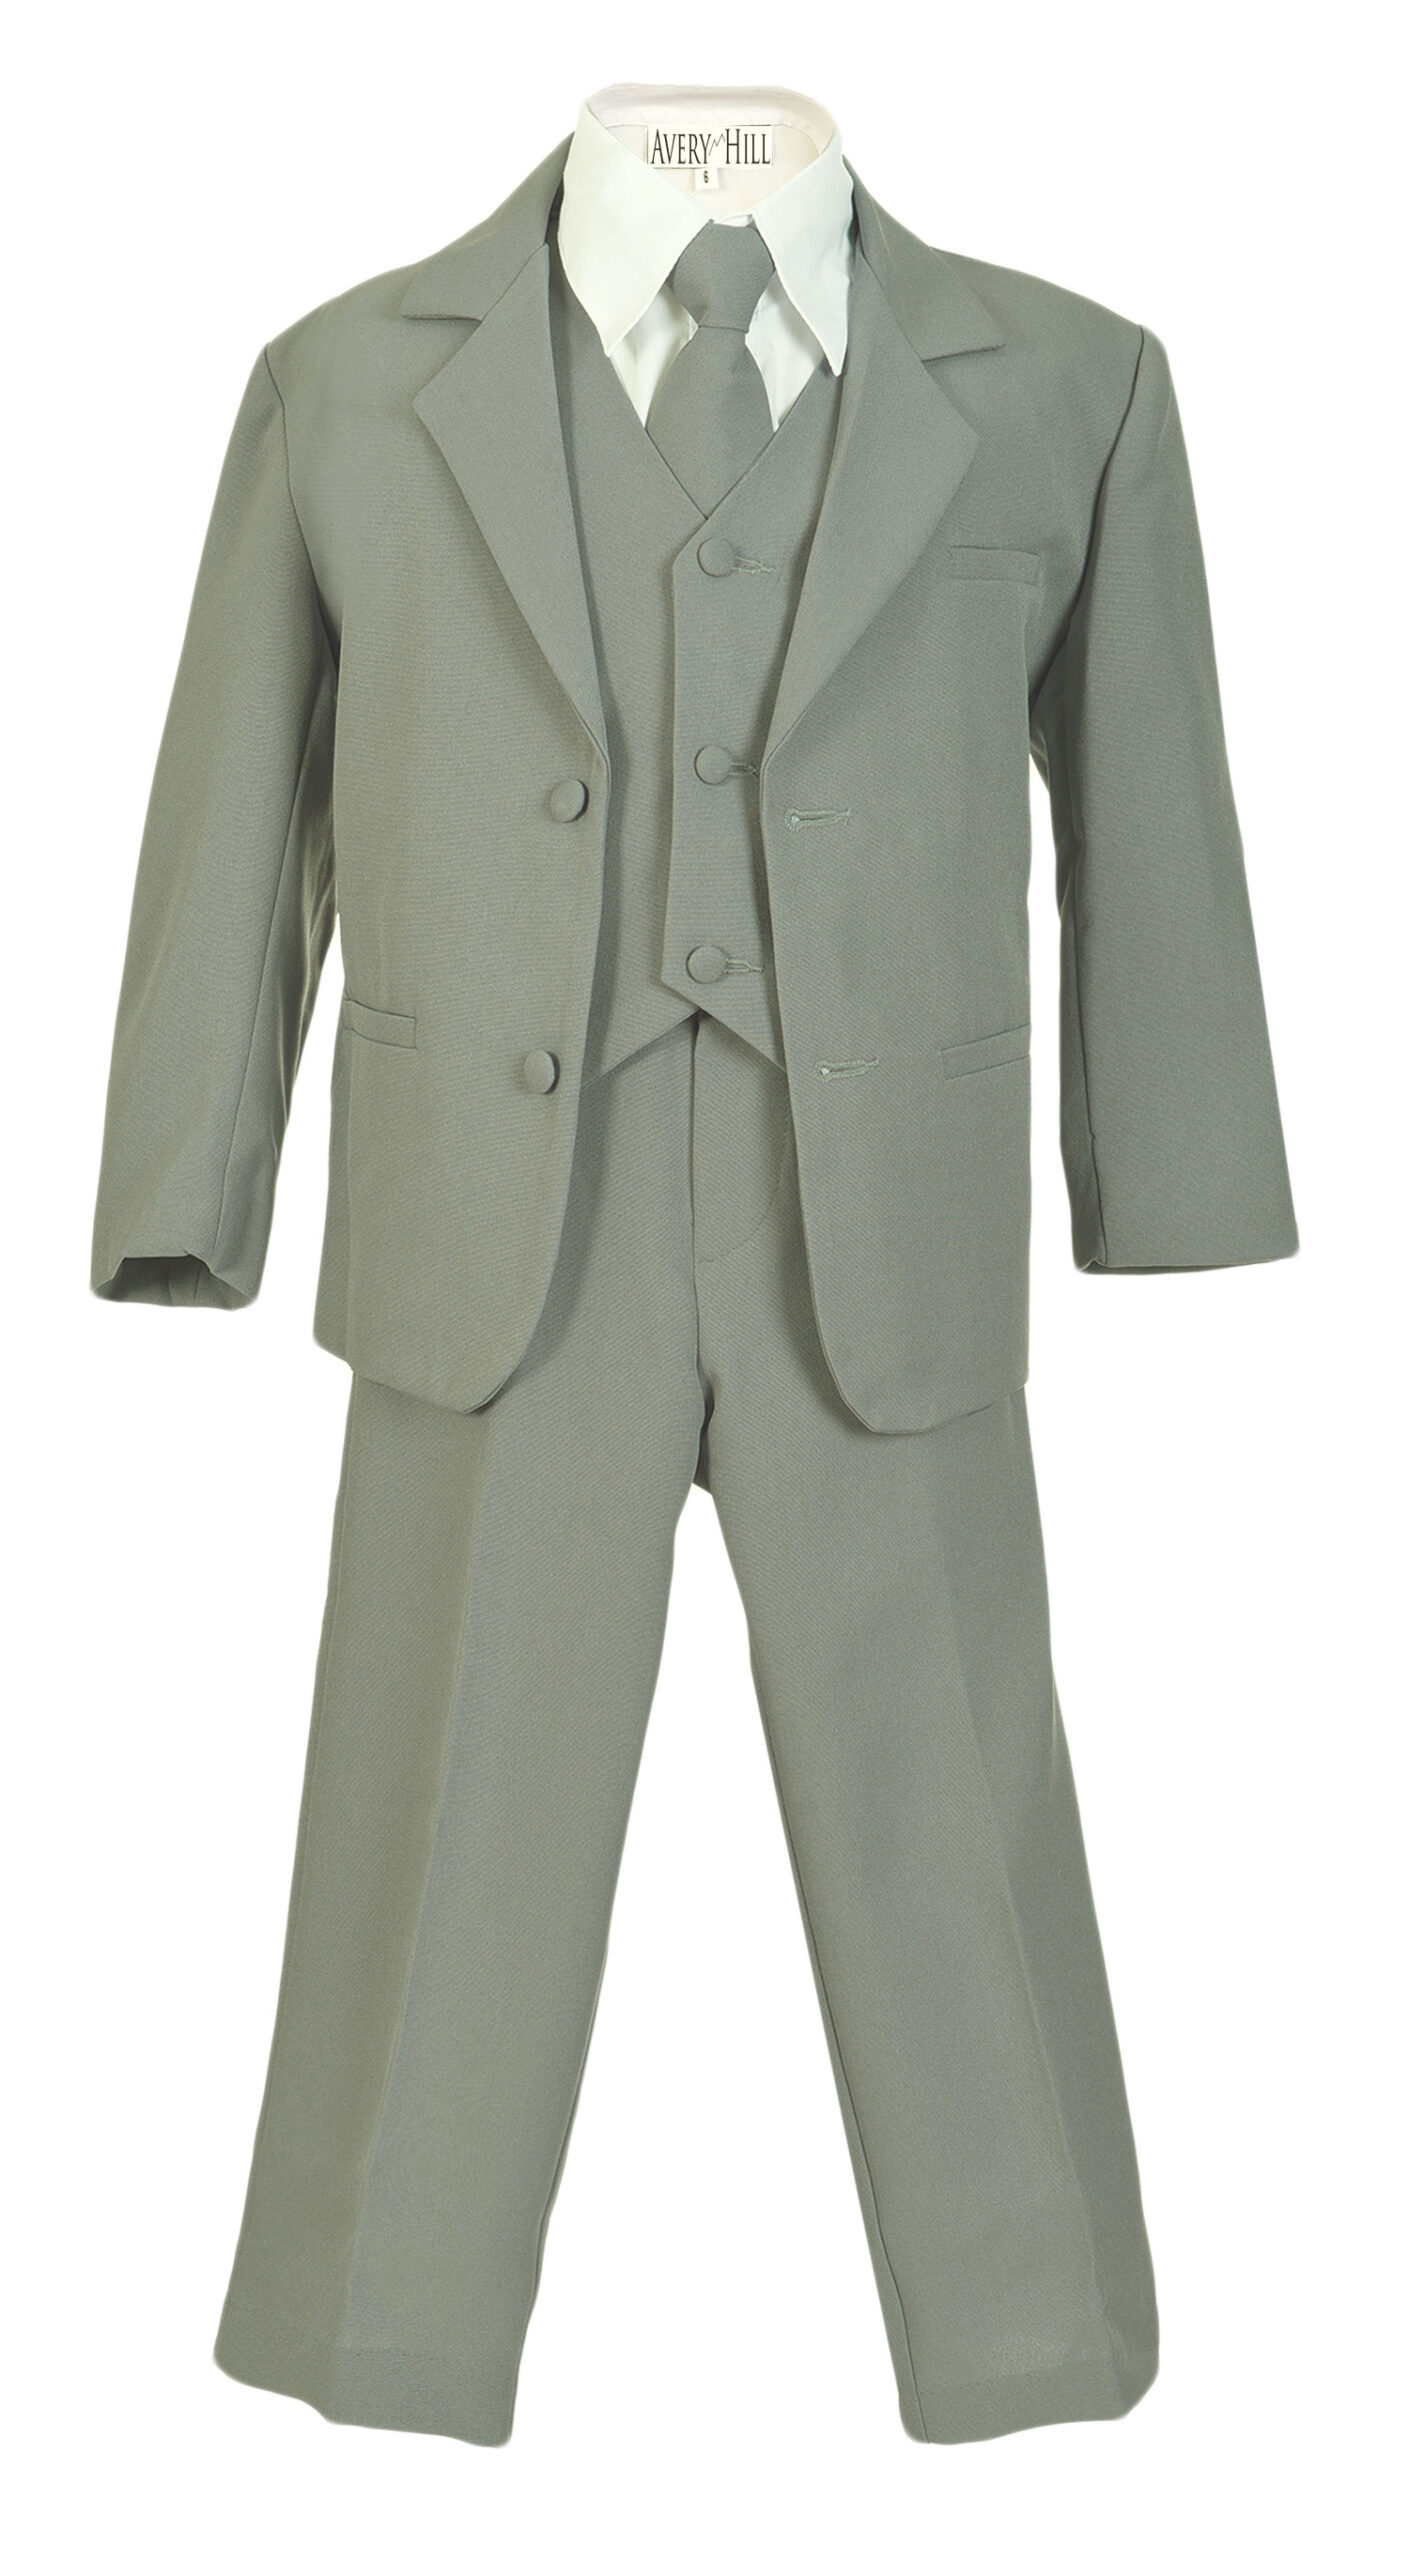 Avery Hill Boys Formal 5 Piece Suit with Shirt and Vest Silver White - 6